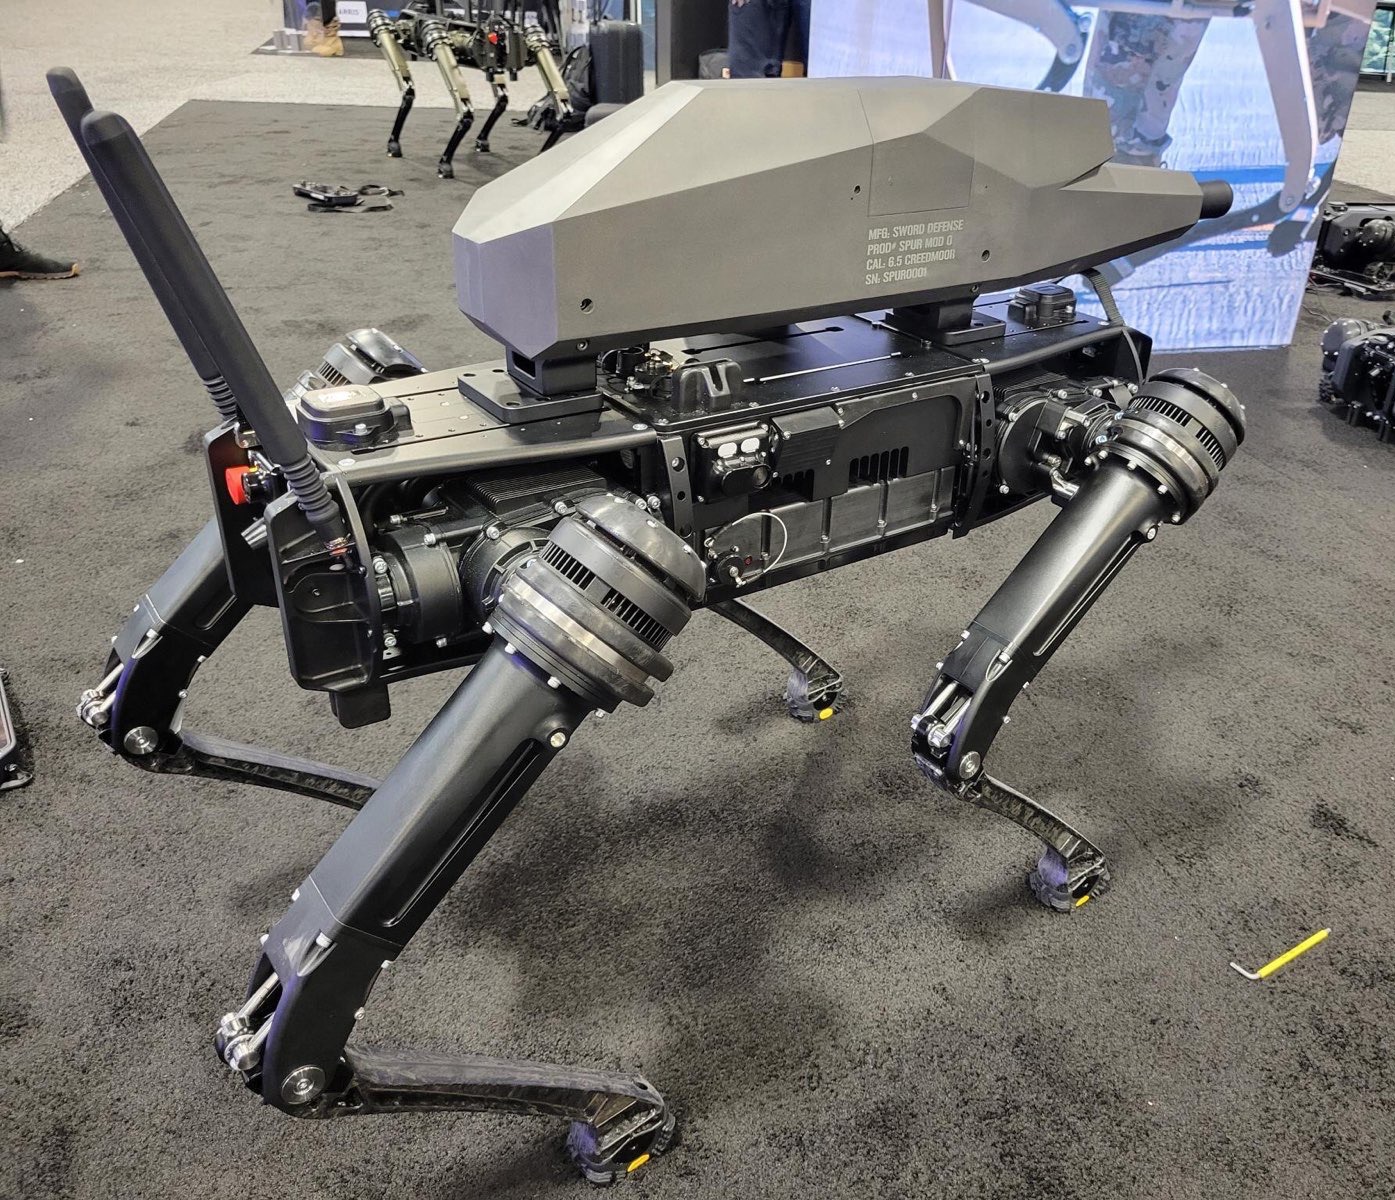 Ghost Robotics equips Vision 60 four-legged robot with an automatic rifle